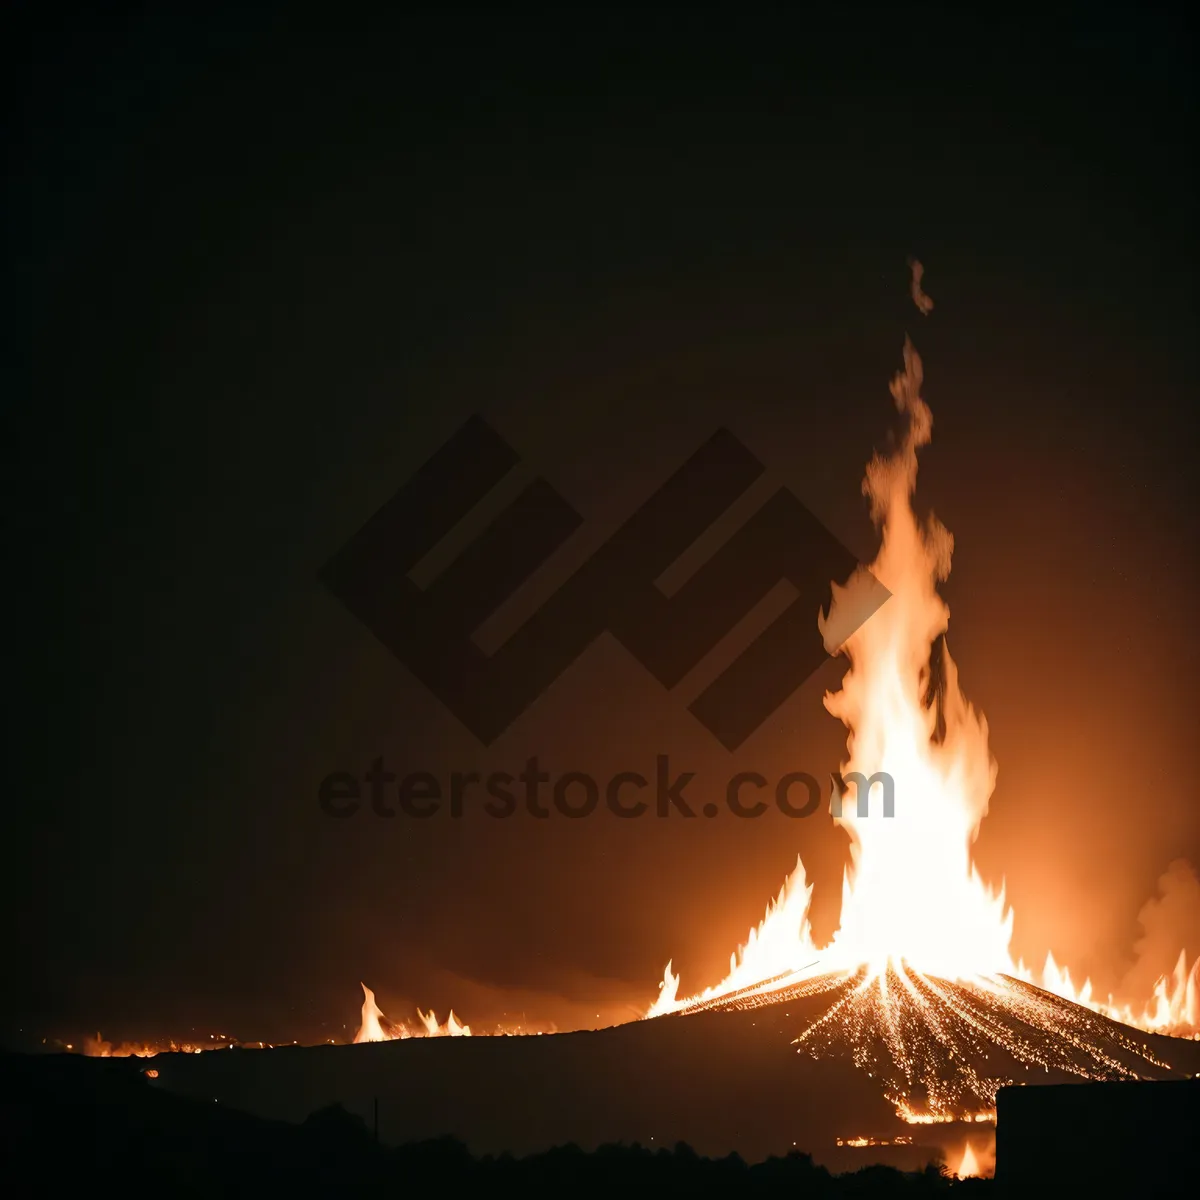 Picture of Blazing Inferno: Volcanic Mountain Engulfed in Flames